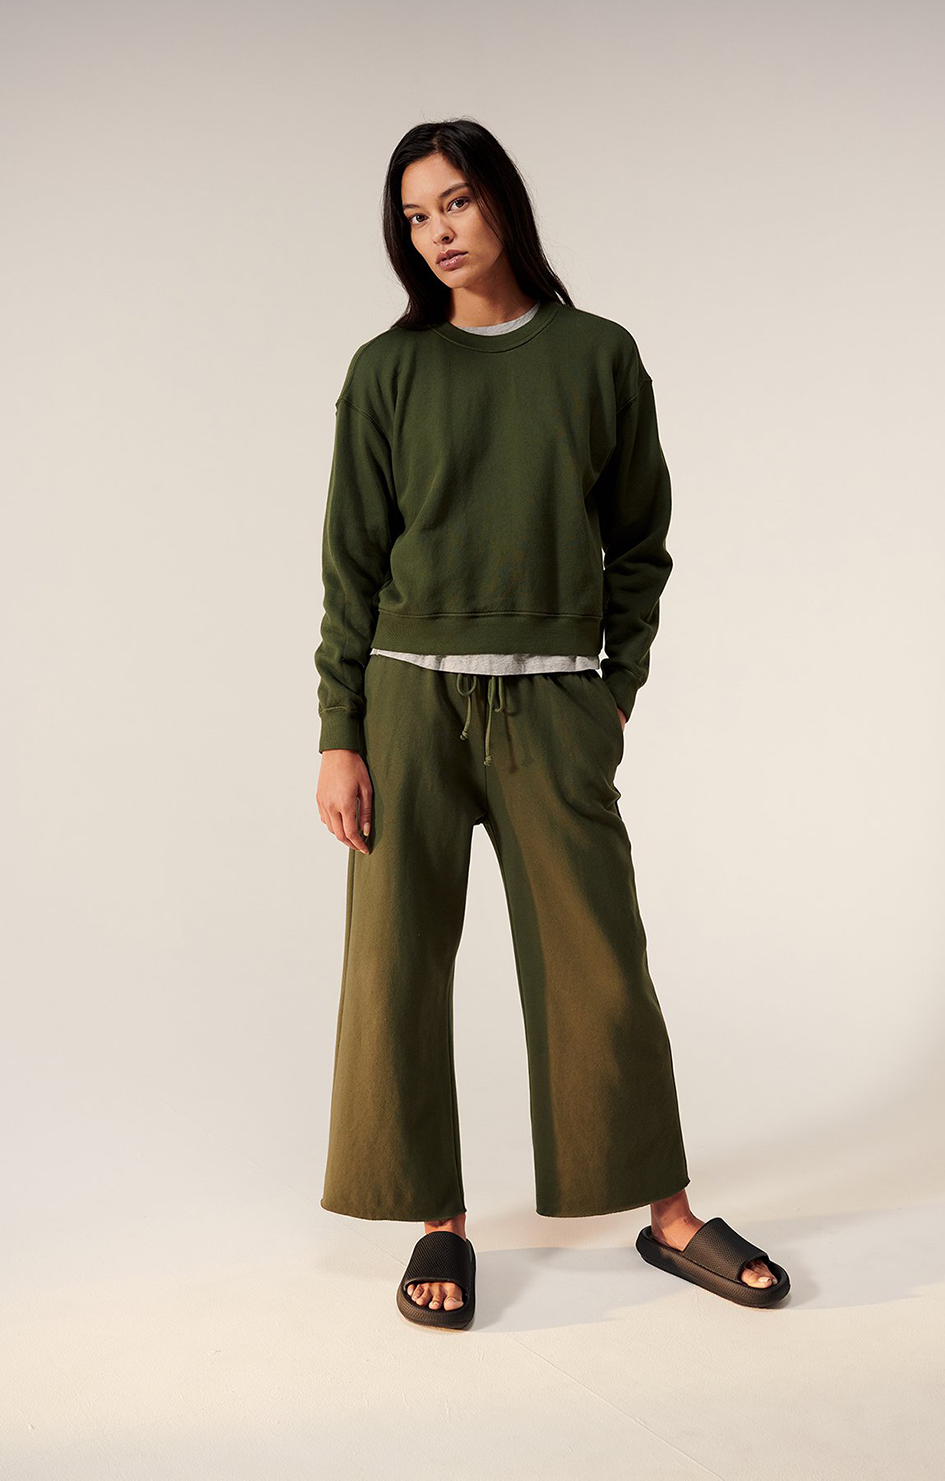 Montecito Pant - Dillweed